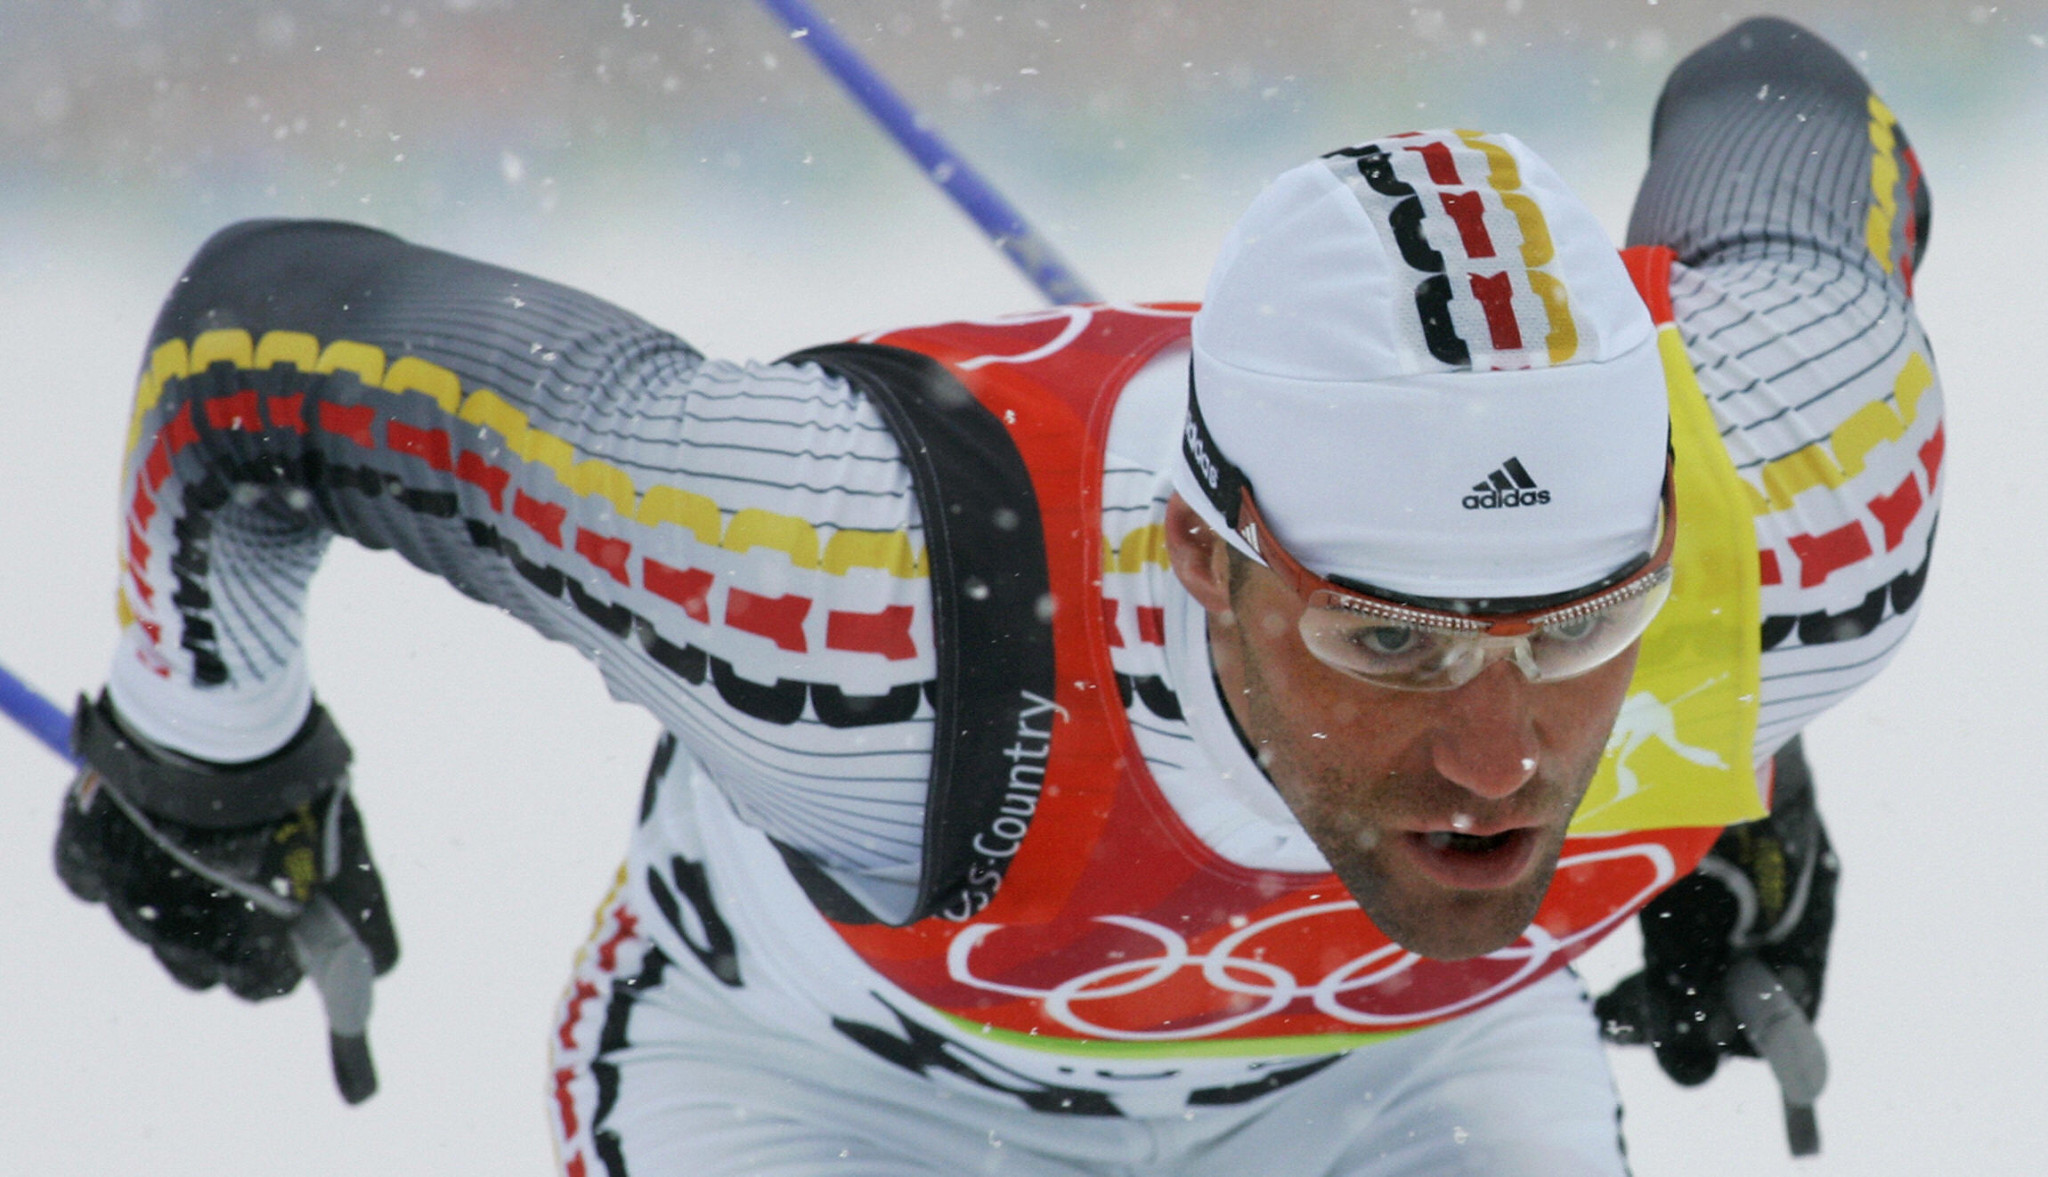 German cross-country skiing manager Andreas Schlütter said 